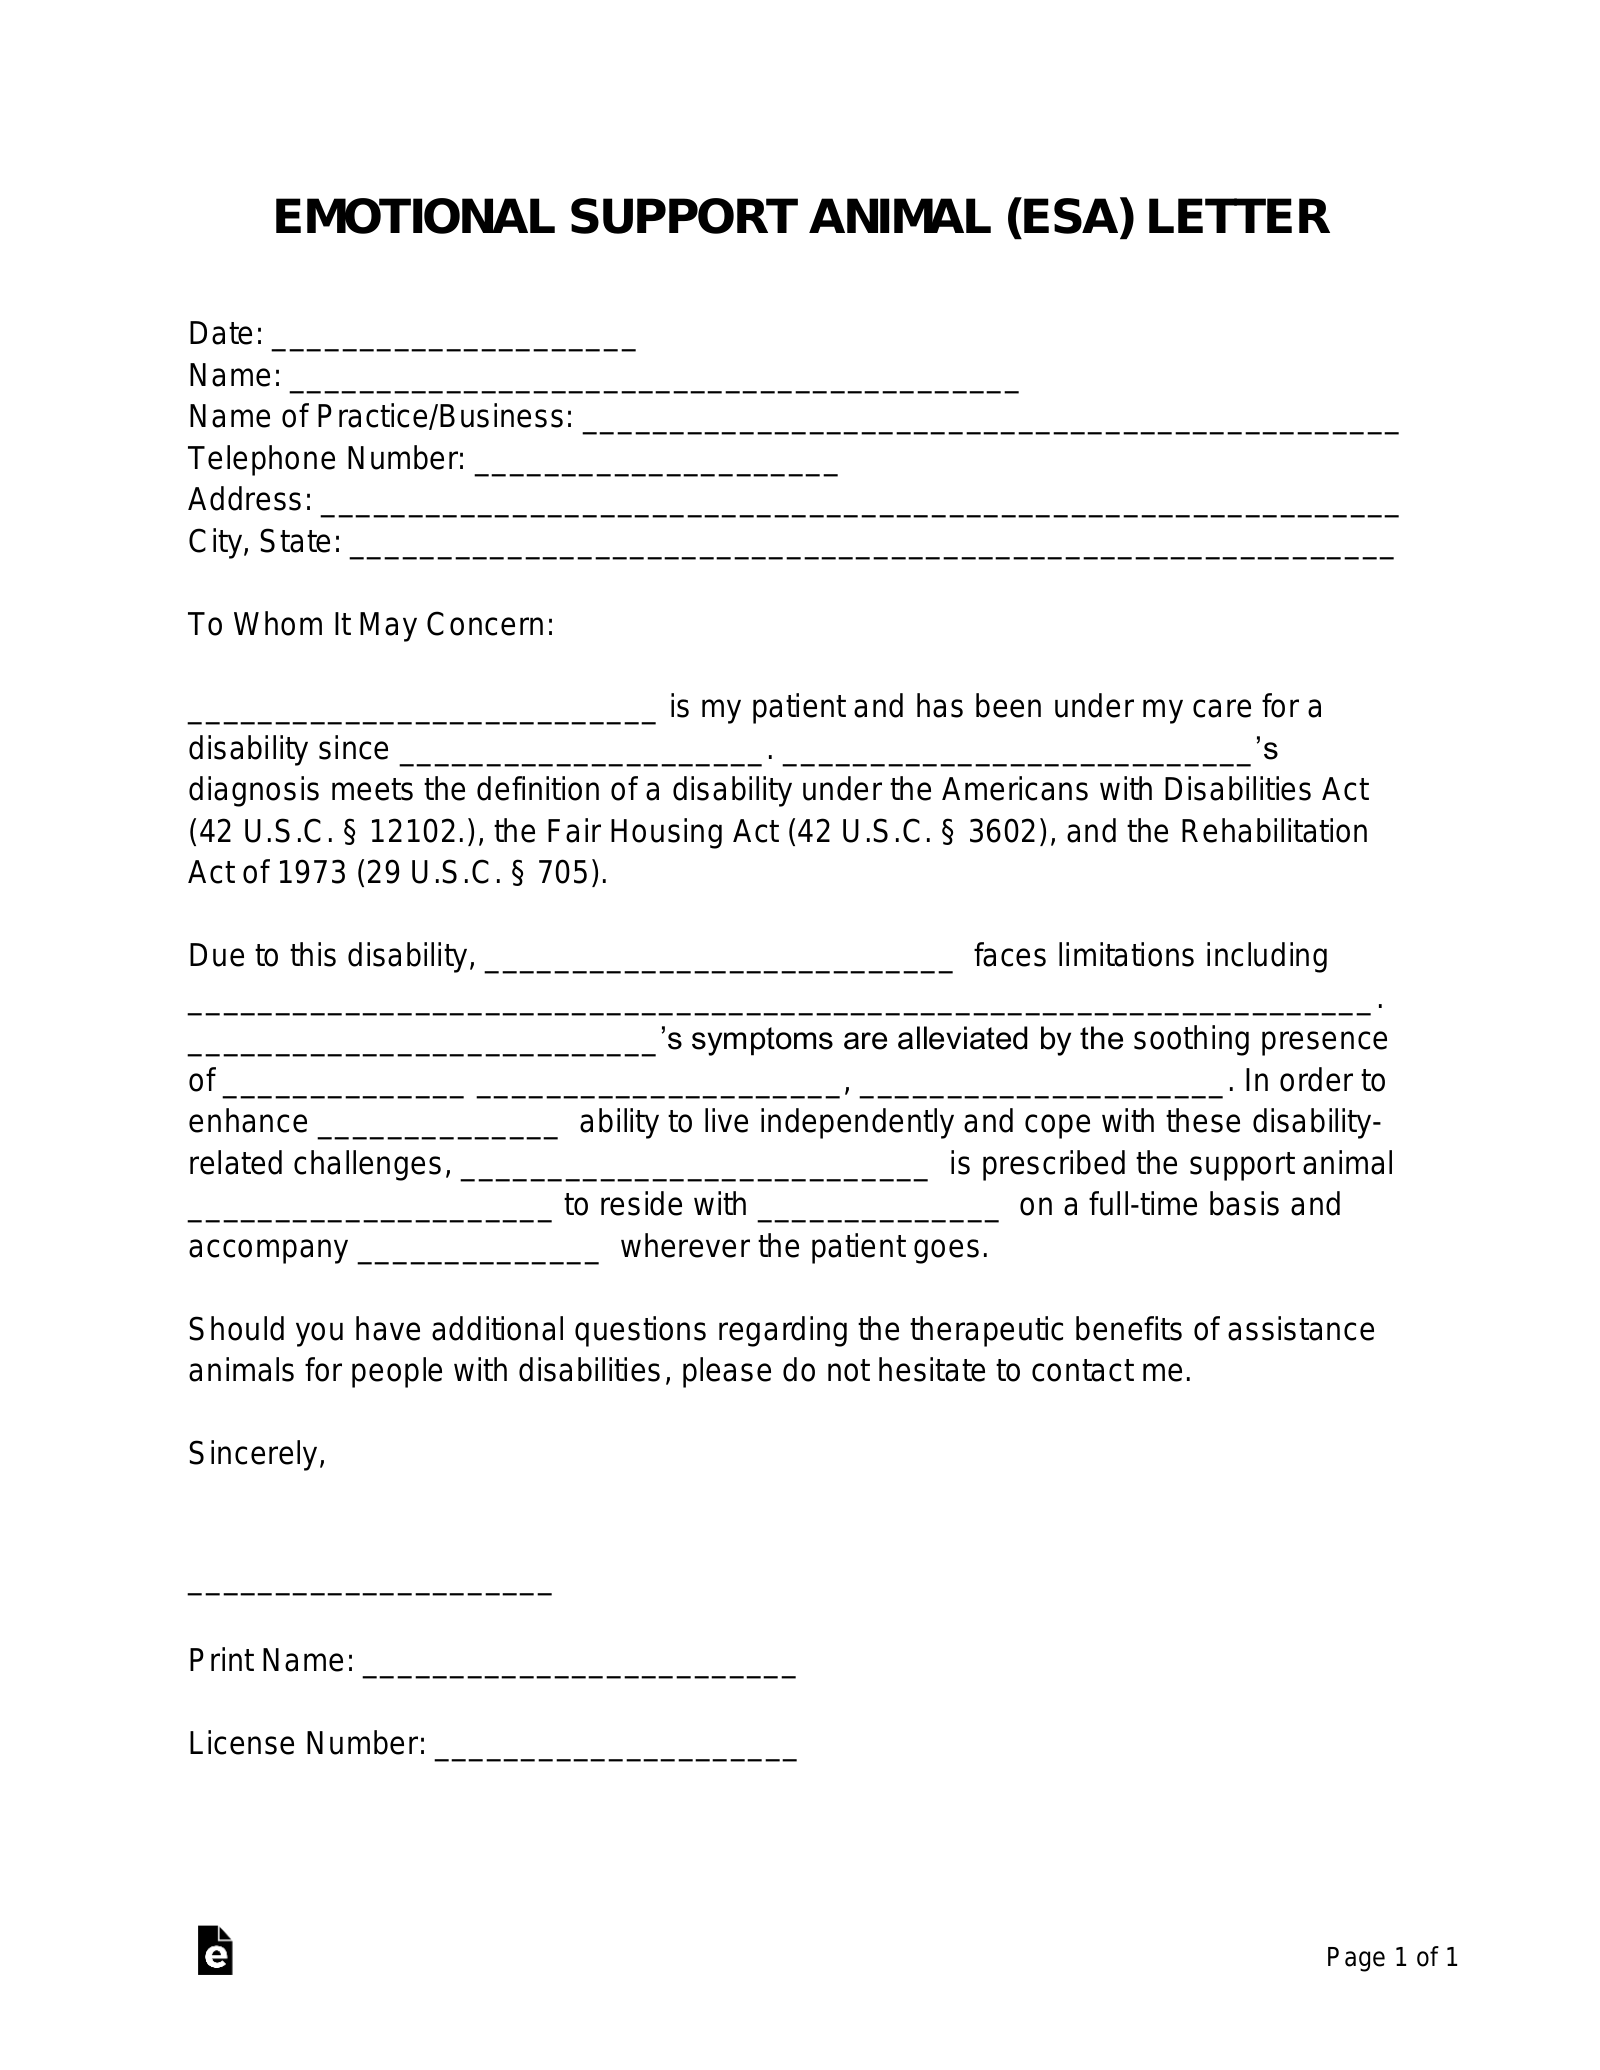 free-emotional-support-animal-esa-letter-template-pdf-word